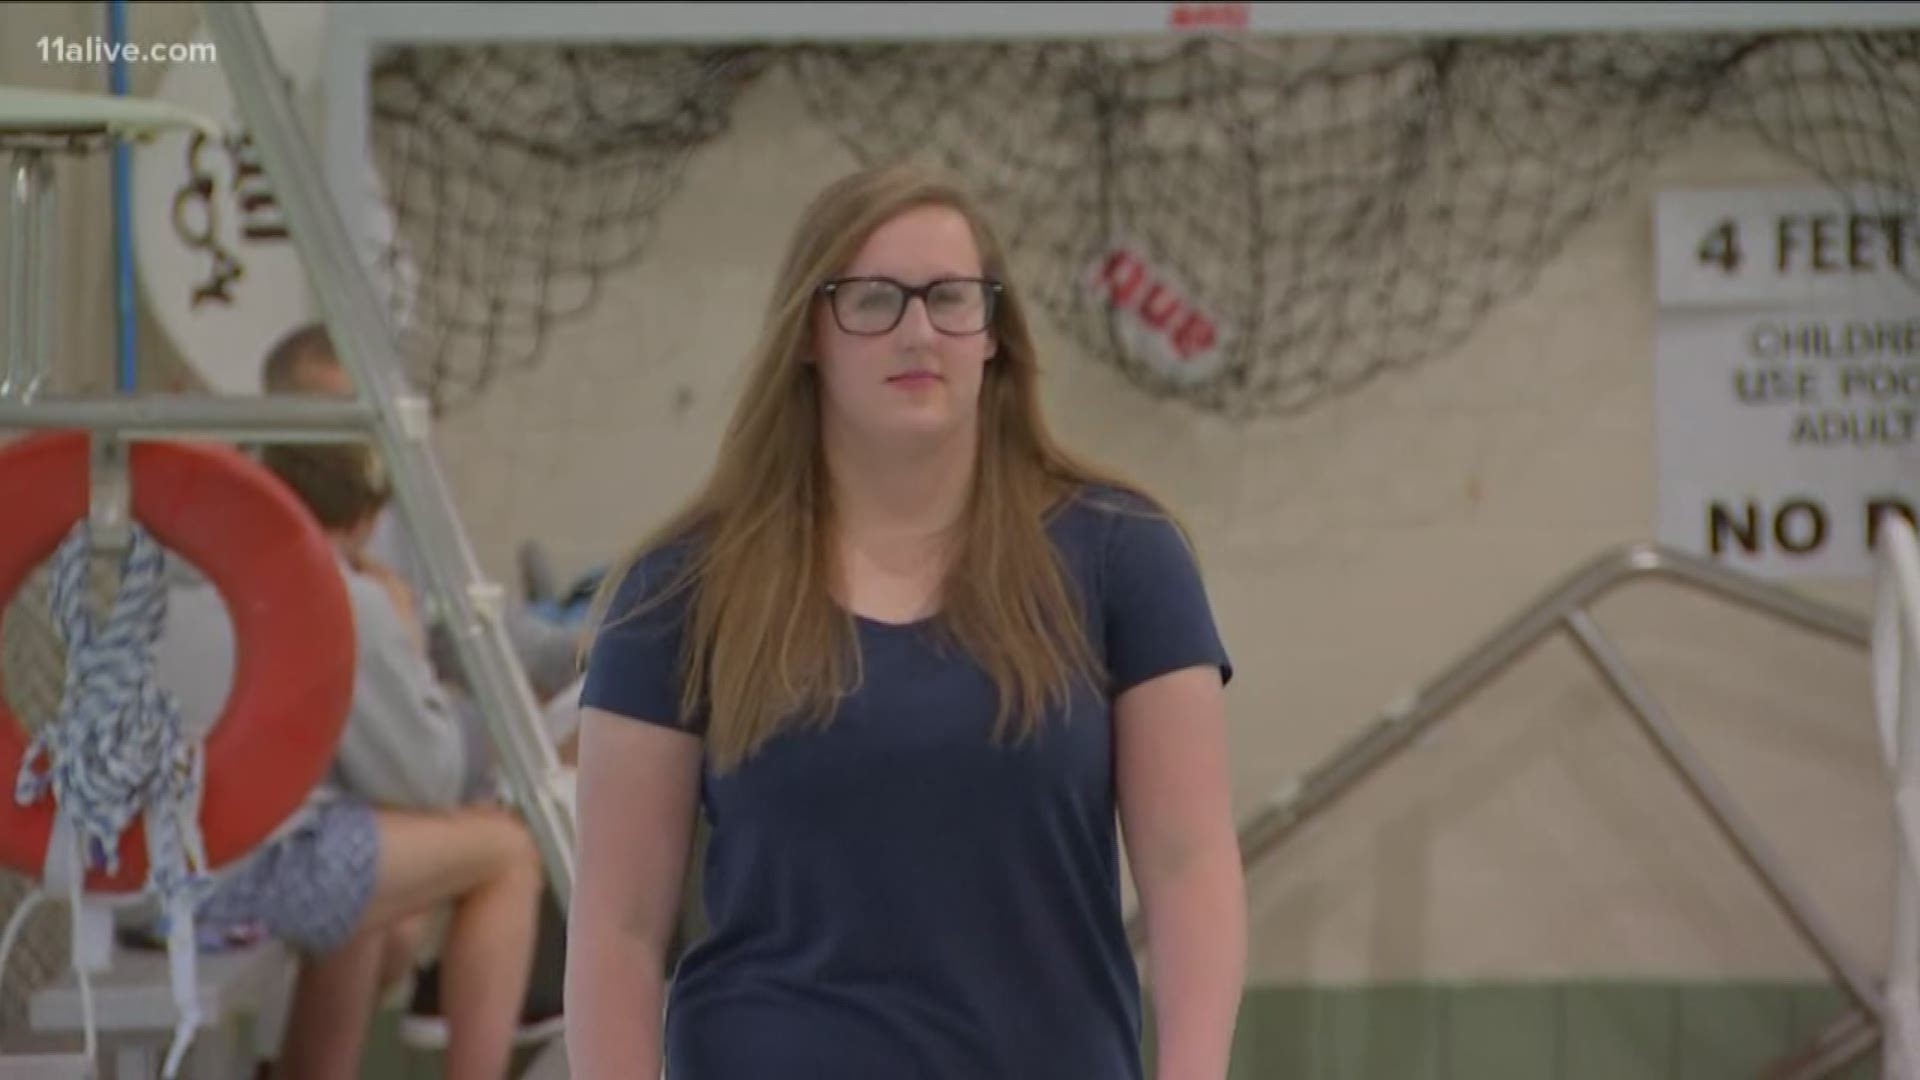 Aspen Shelton, 17, is legally blind. But in the water, she feels no restrictions.